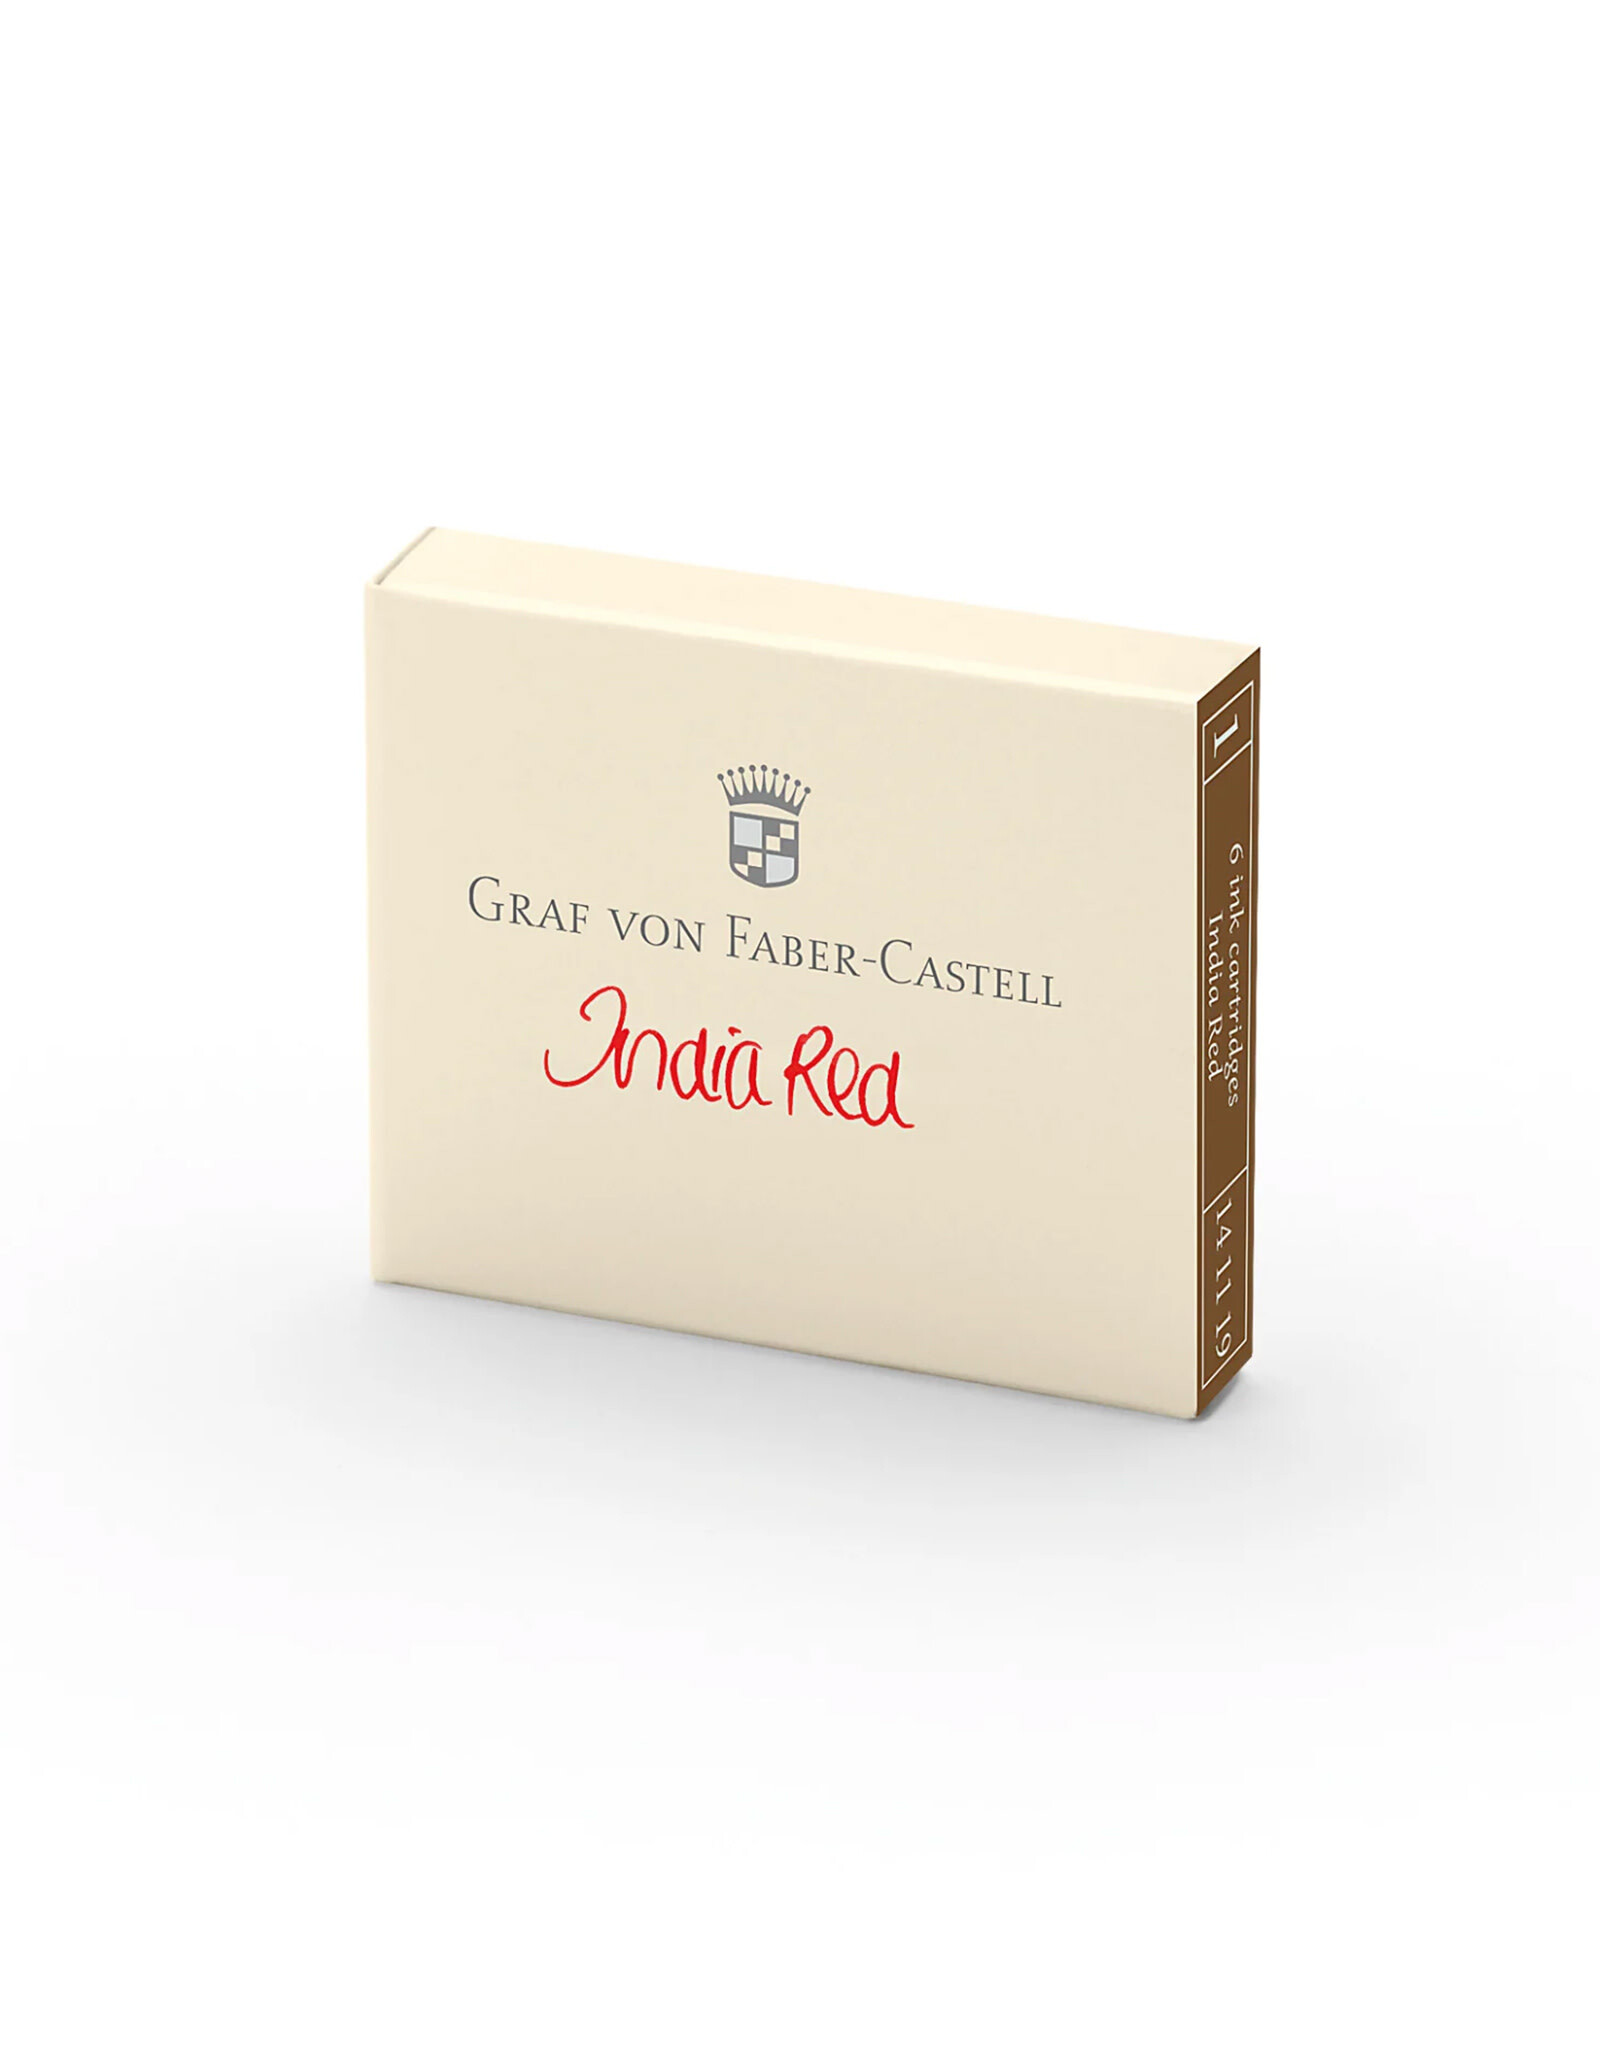 FABER-CASTELL Faber-Castell Ink Cartridge Set of 6, India Red